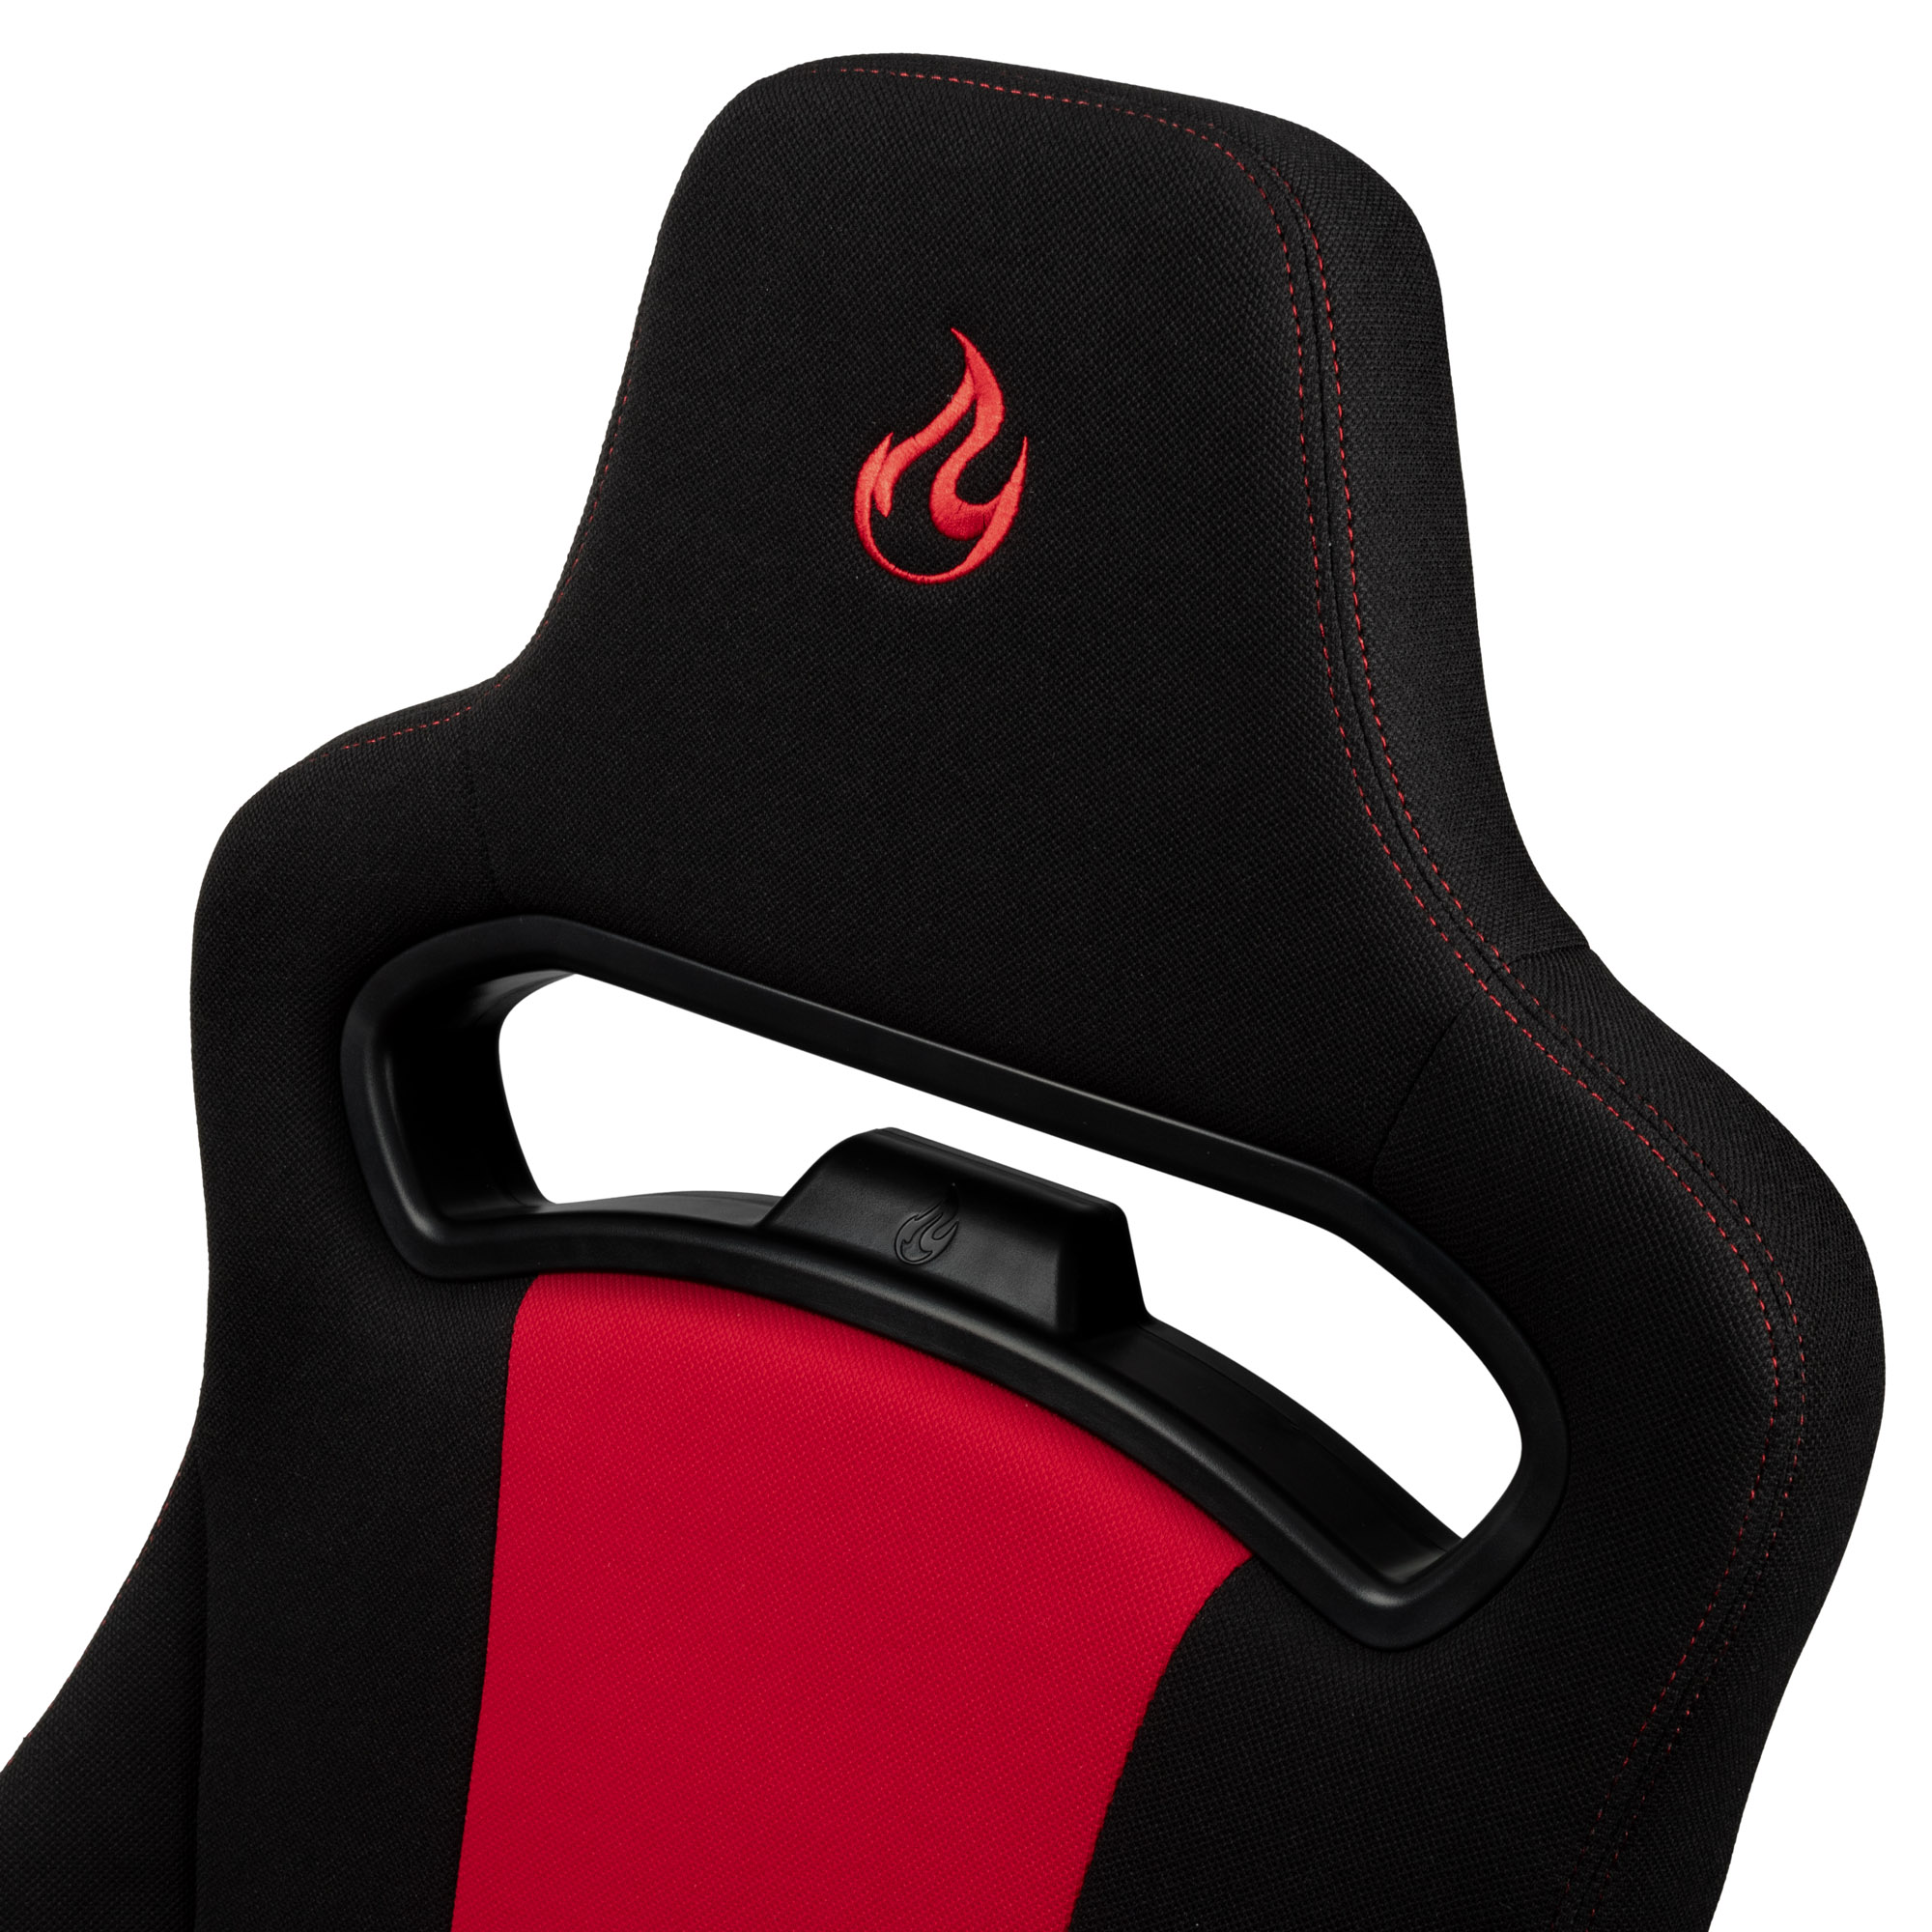 Nitro Concepts - E250 Gaming Chair Black/Red